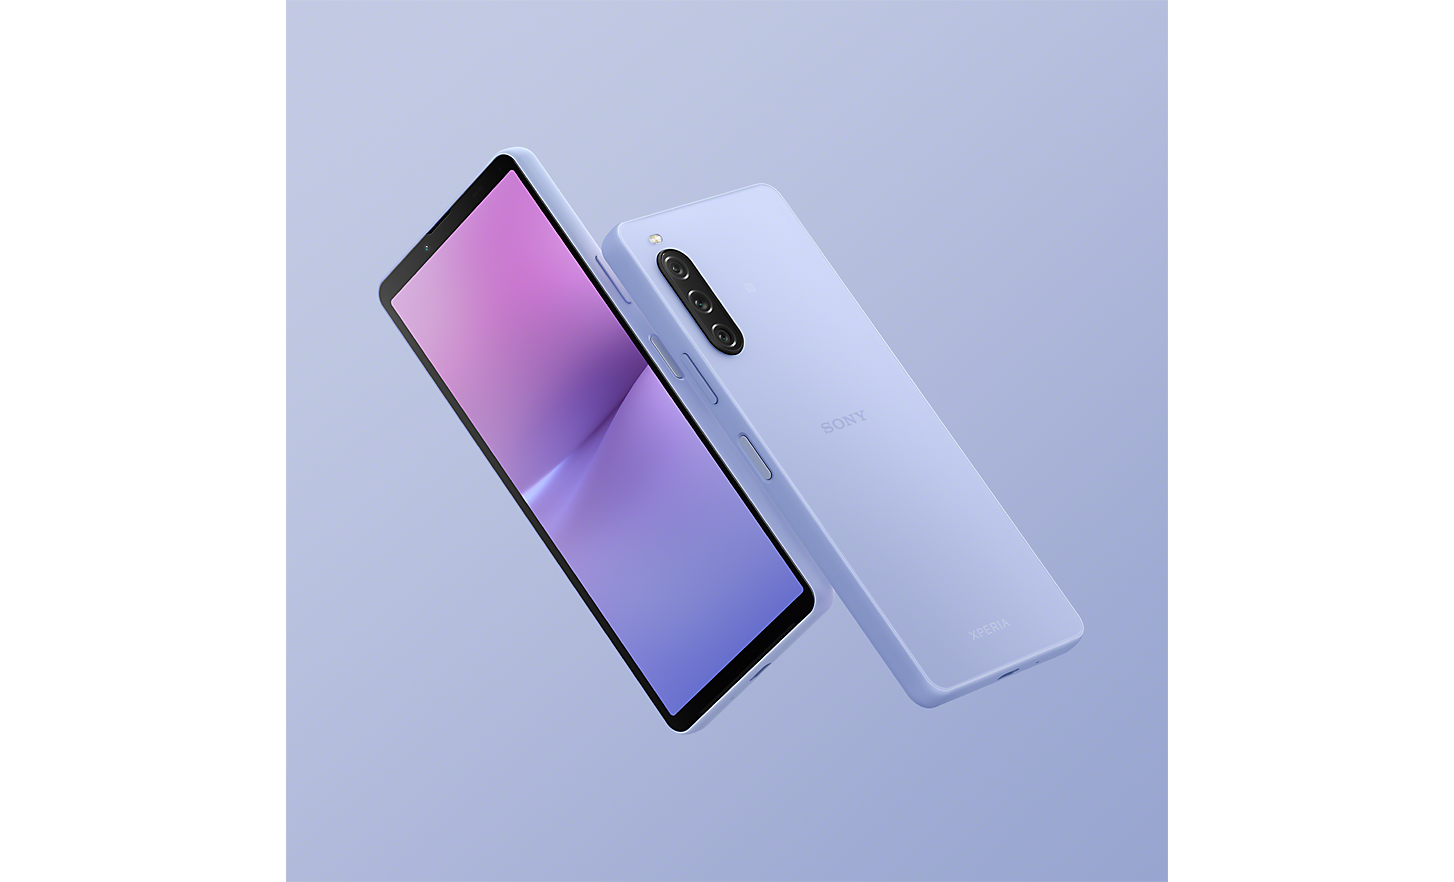 Two Xperia 10 V smartphones in Lavender, one front-facing, one rear-facing